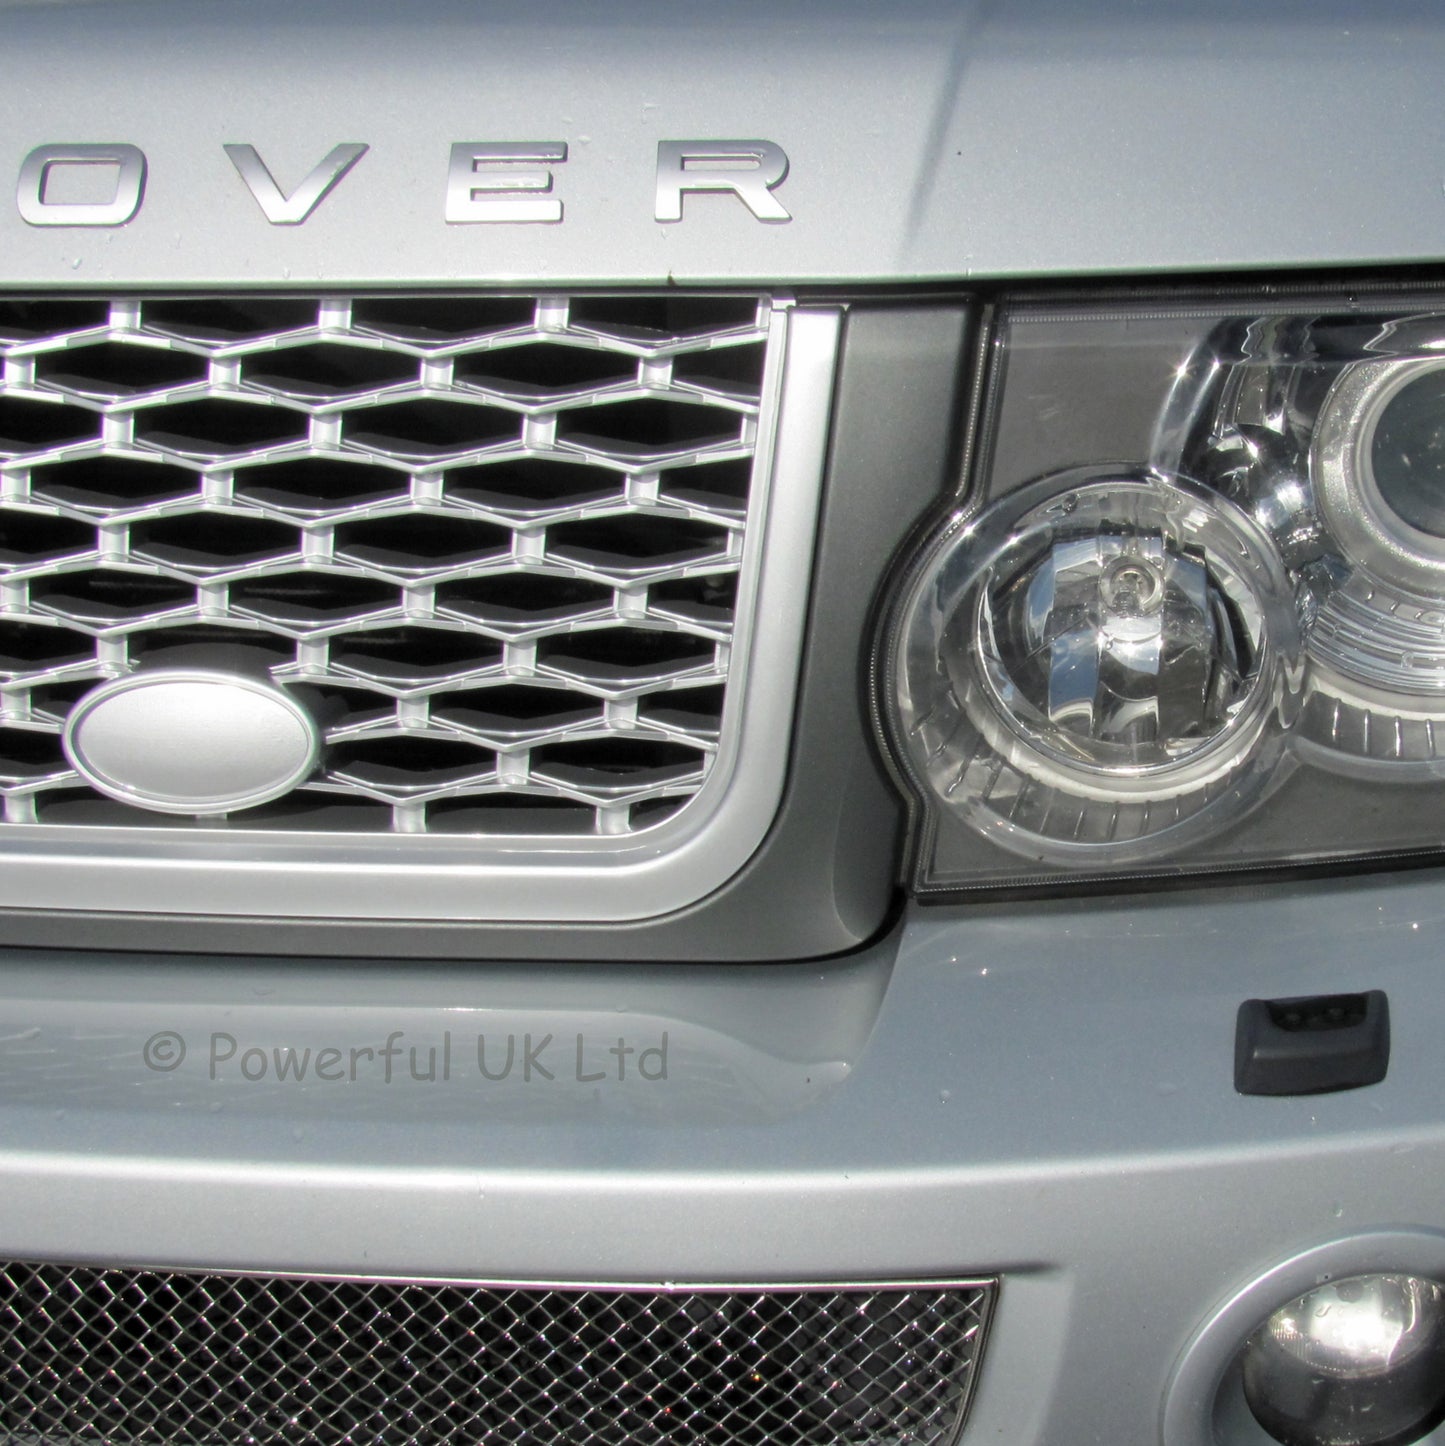 Front Grille - Grey/Silver/Silver for Range Rover Sport 05-09